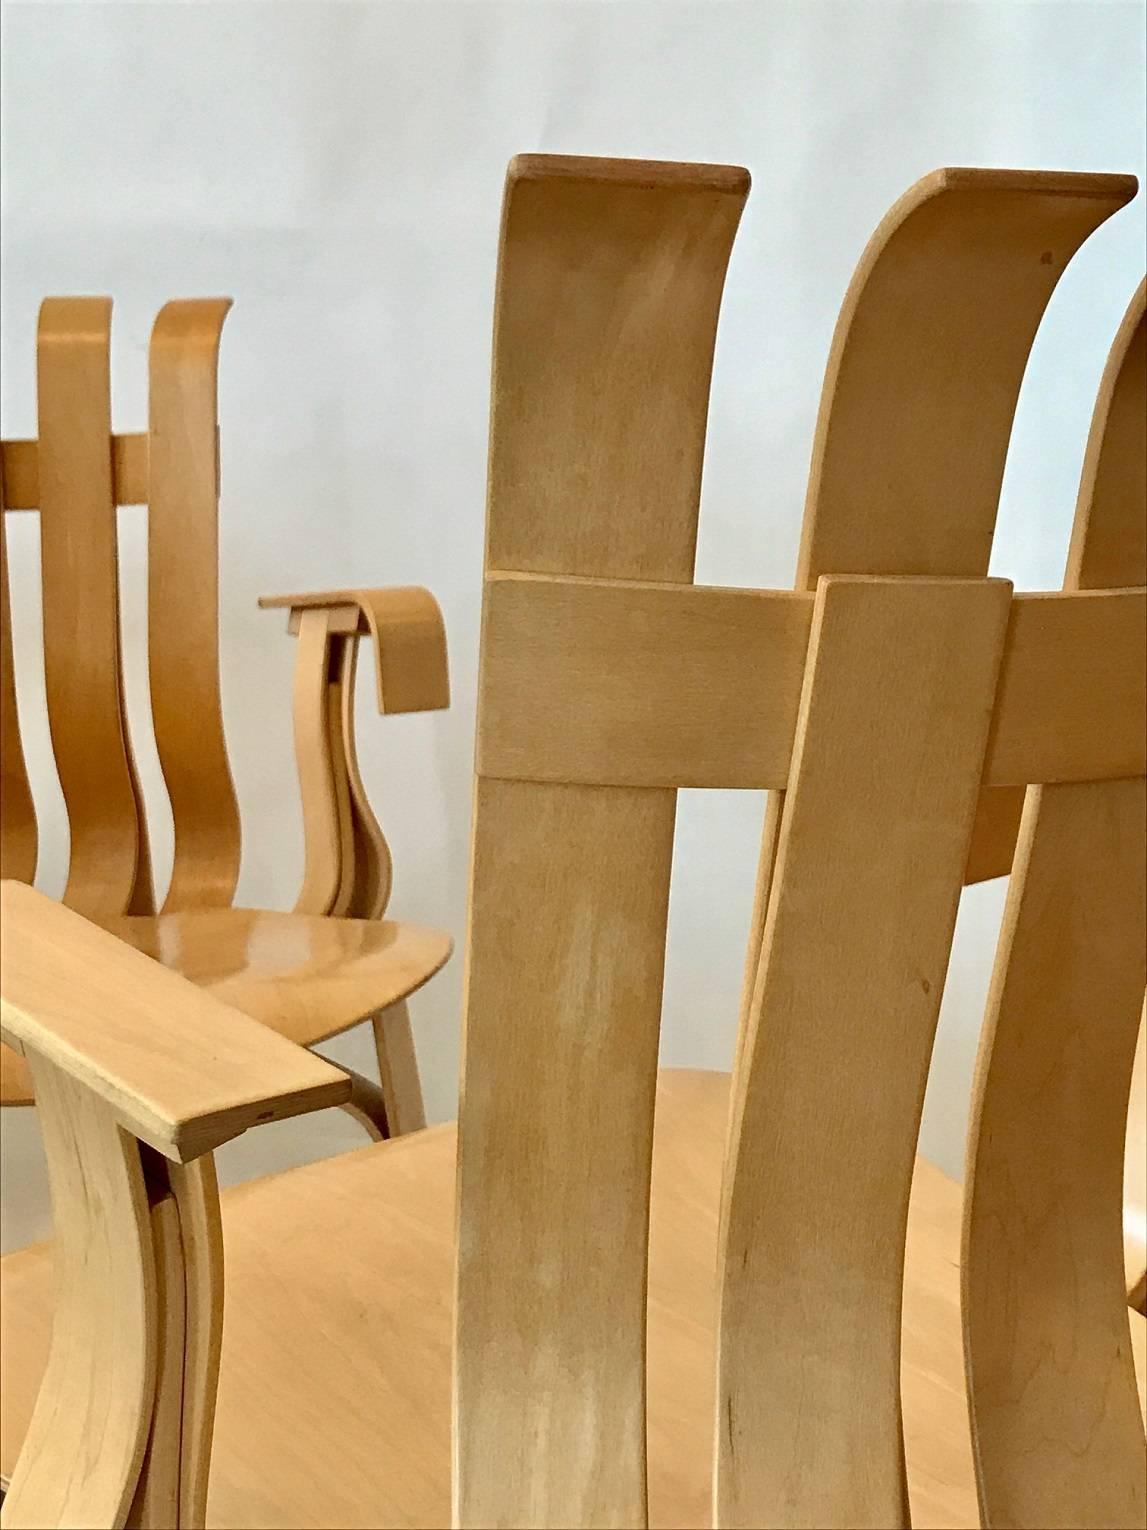 Two iconic "hat trick" armchairs designed by Frank Gehry in 1992 for Knoll; the back and legs in bent laminated maple veneer strips; the seat in maple cross-ply veneers; plastic glides; each marked with the Knoll logo and date of